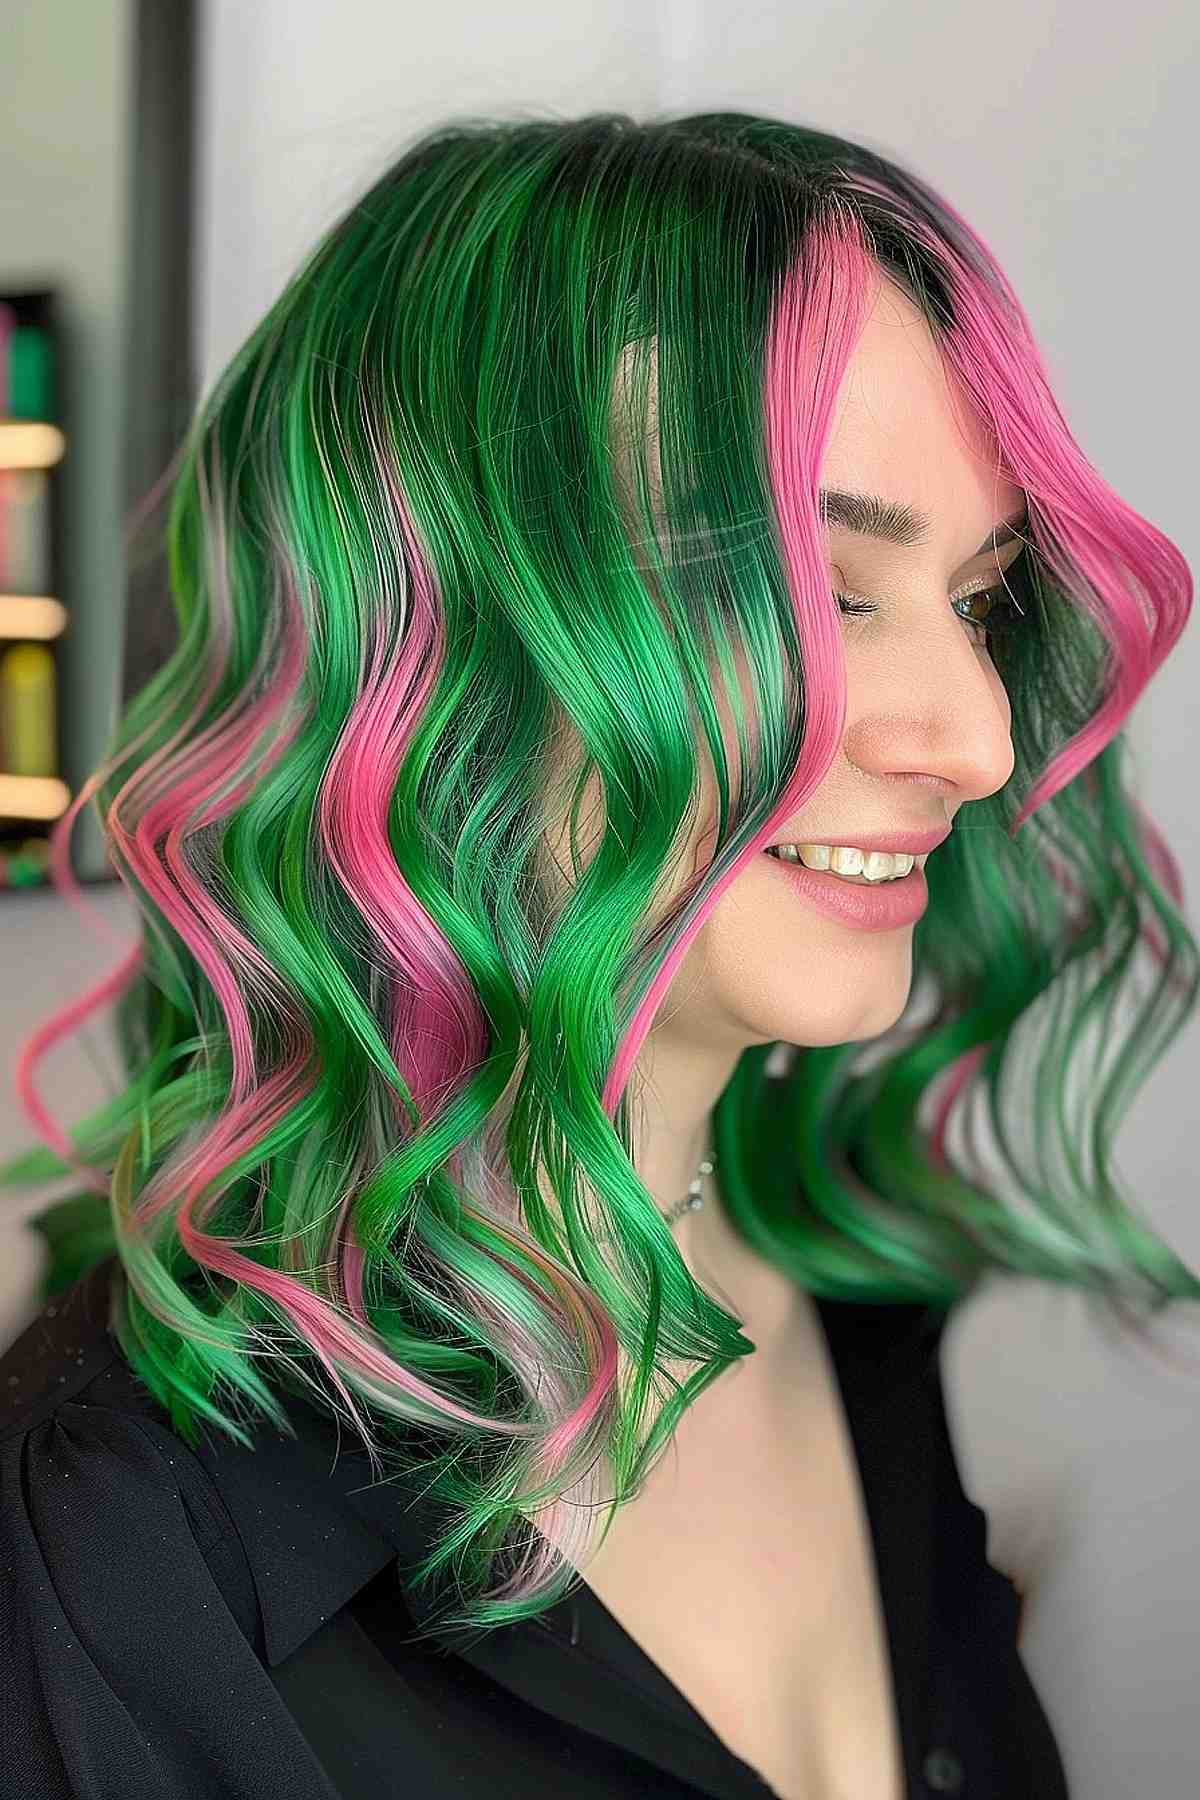 Medium-length wavy hair dyed in vibrant green and pink streaks, inspired by watermelon colors, styled to highlight bold color contrasts.